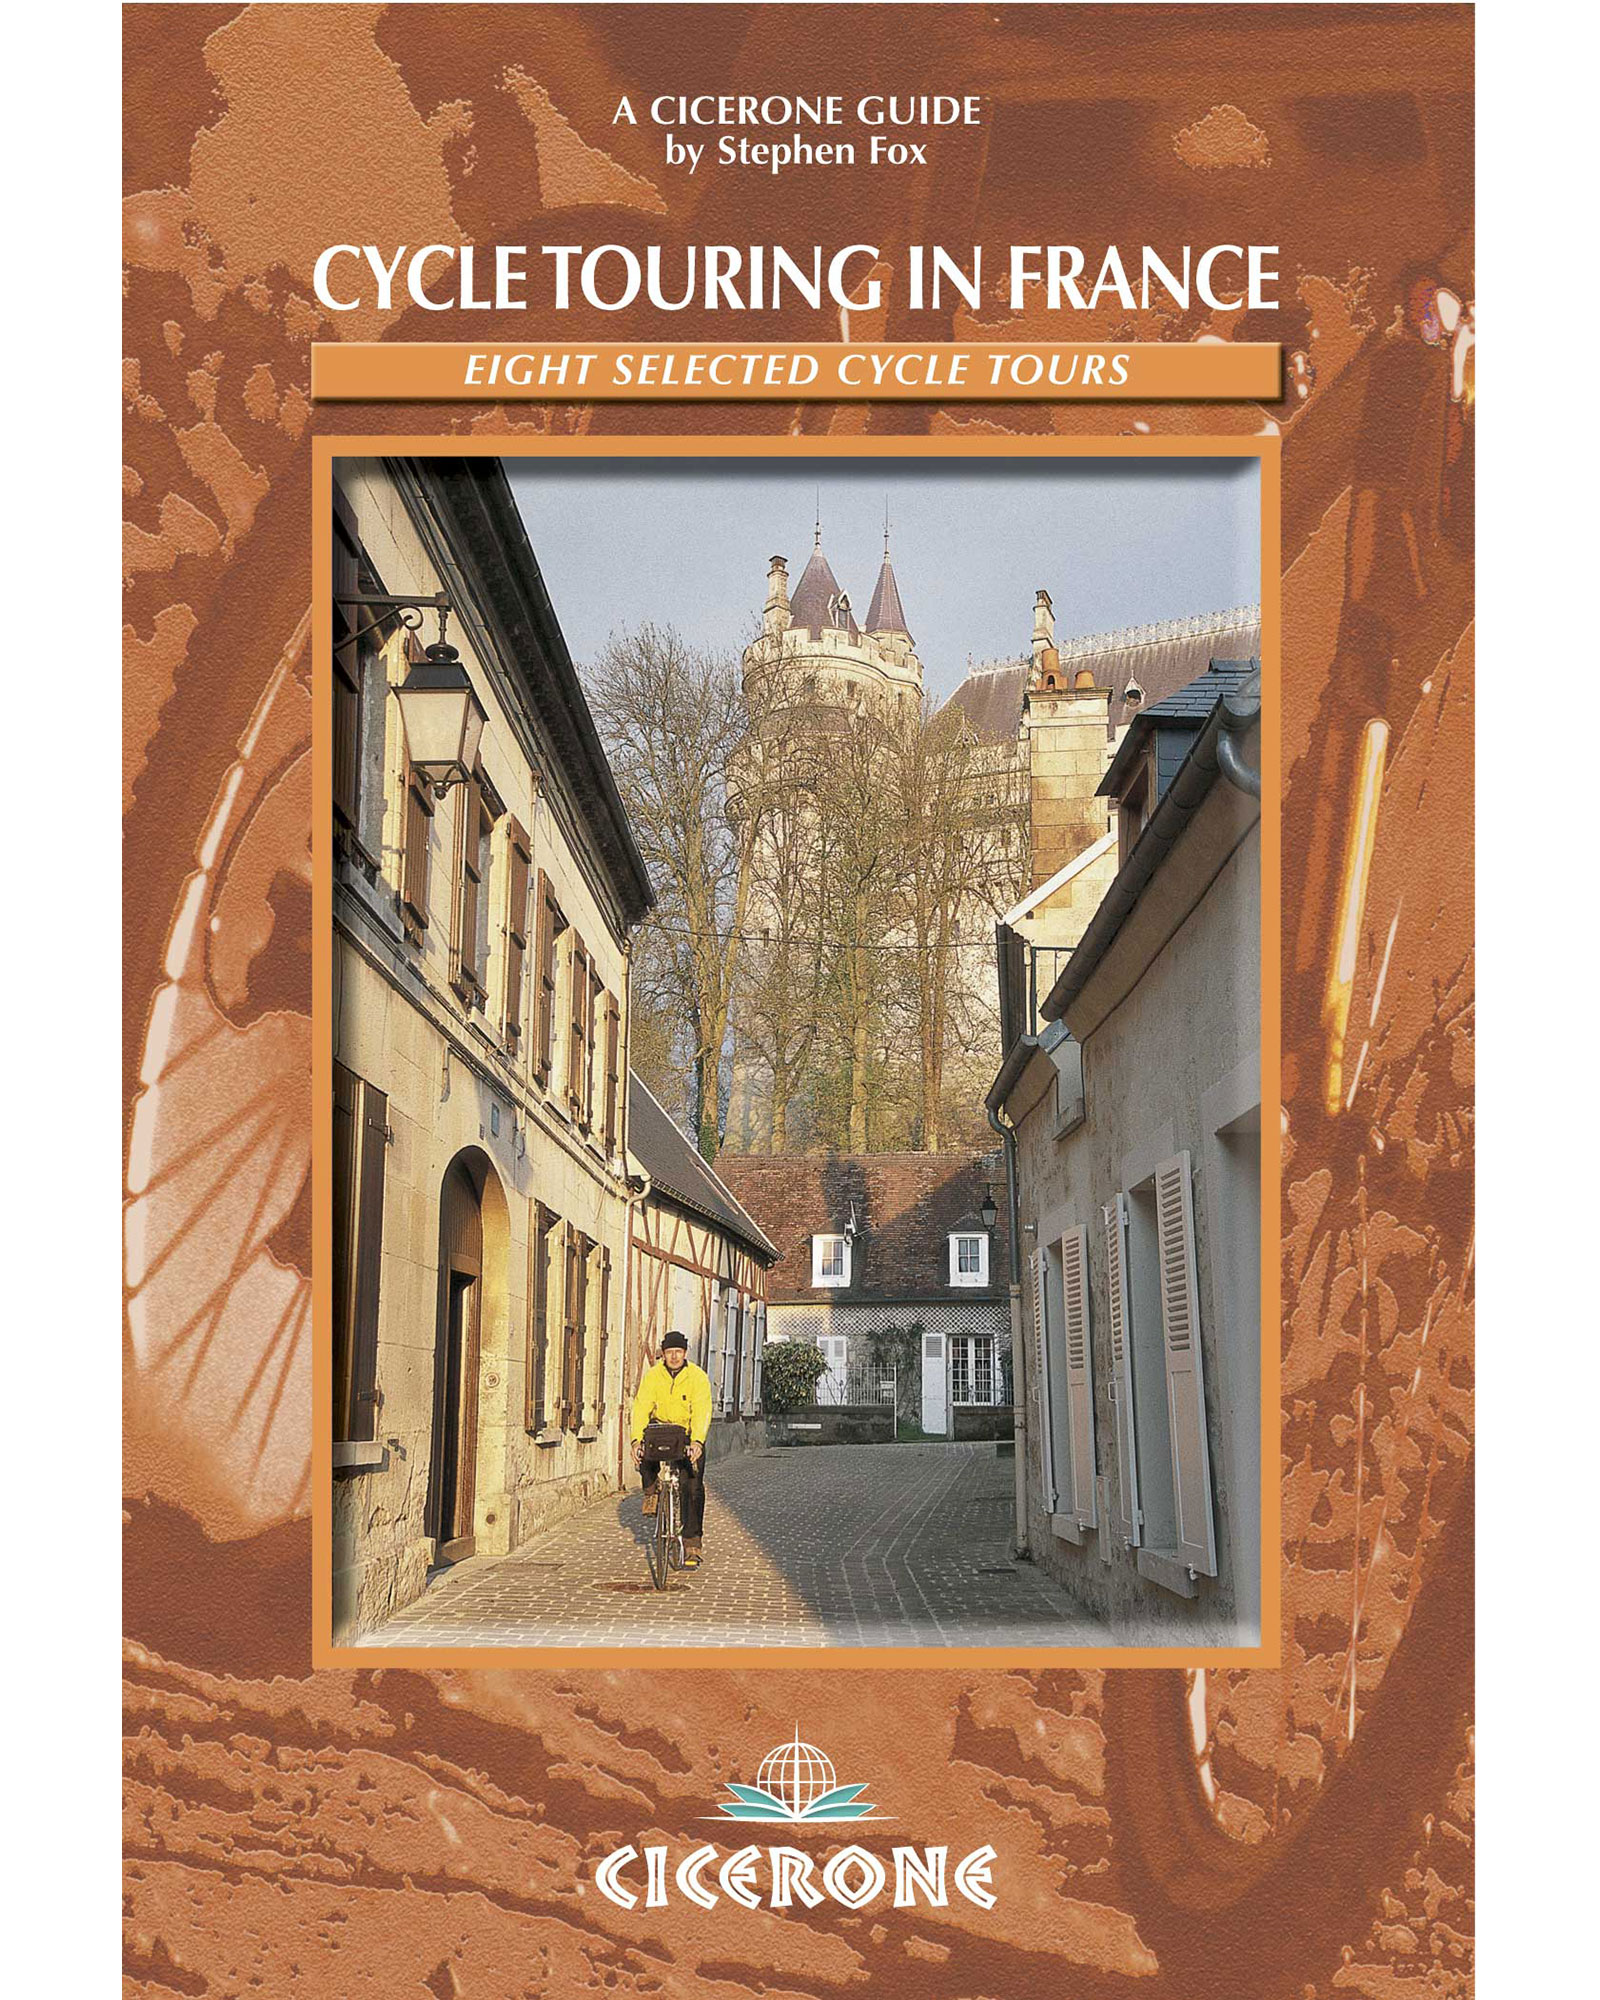 Cicerone Cycle Touring in France Guide Book